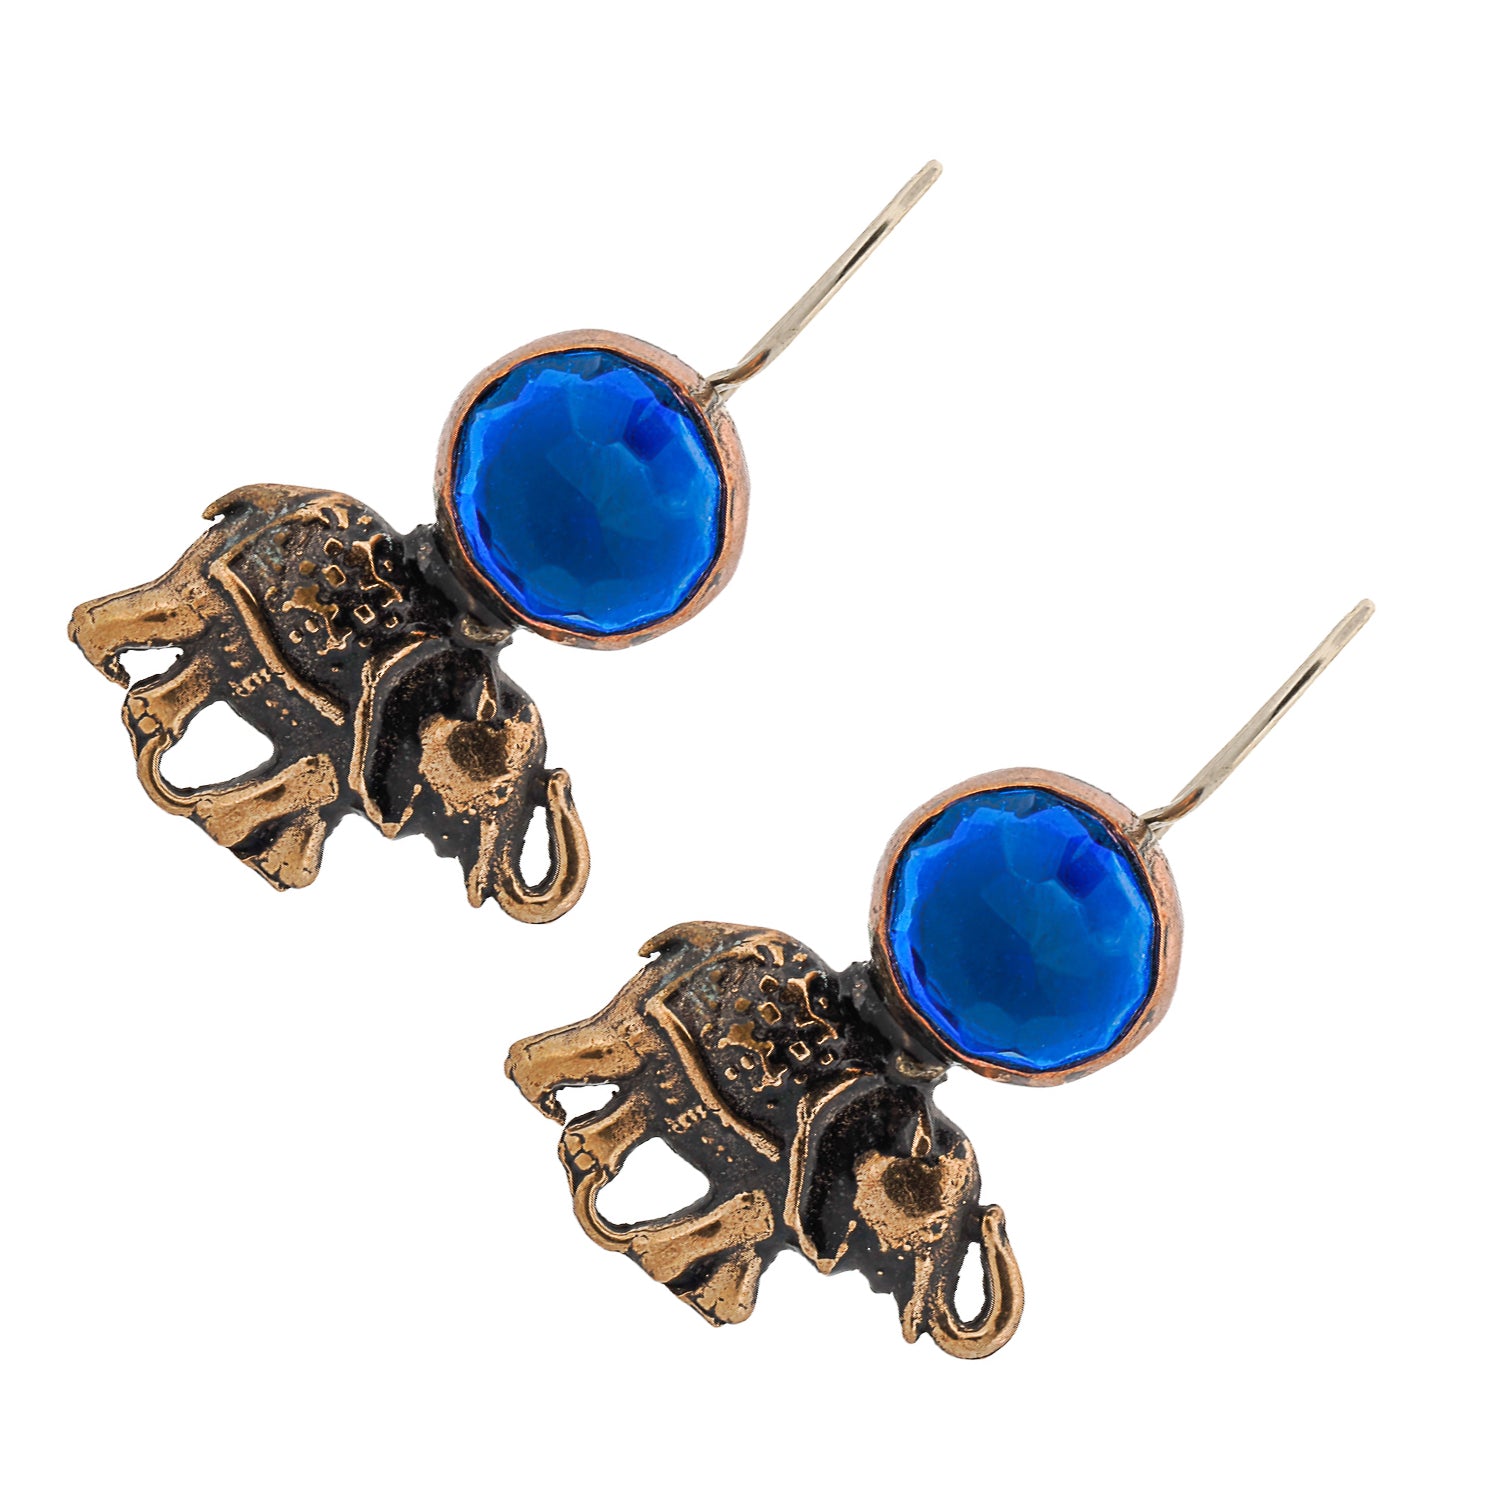 Elephant Earrings, handcrafted with bronze charms and sapphire gemstones, a fusion of art and symbolism.